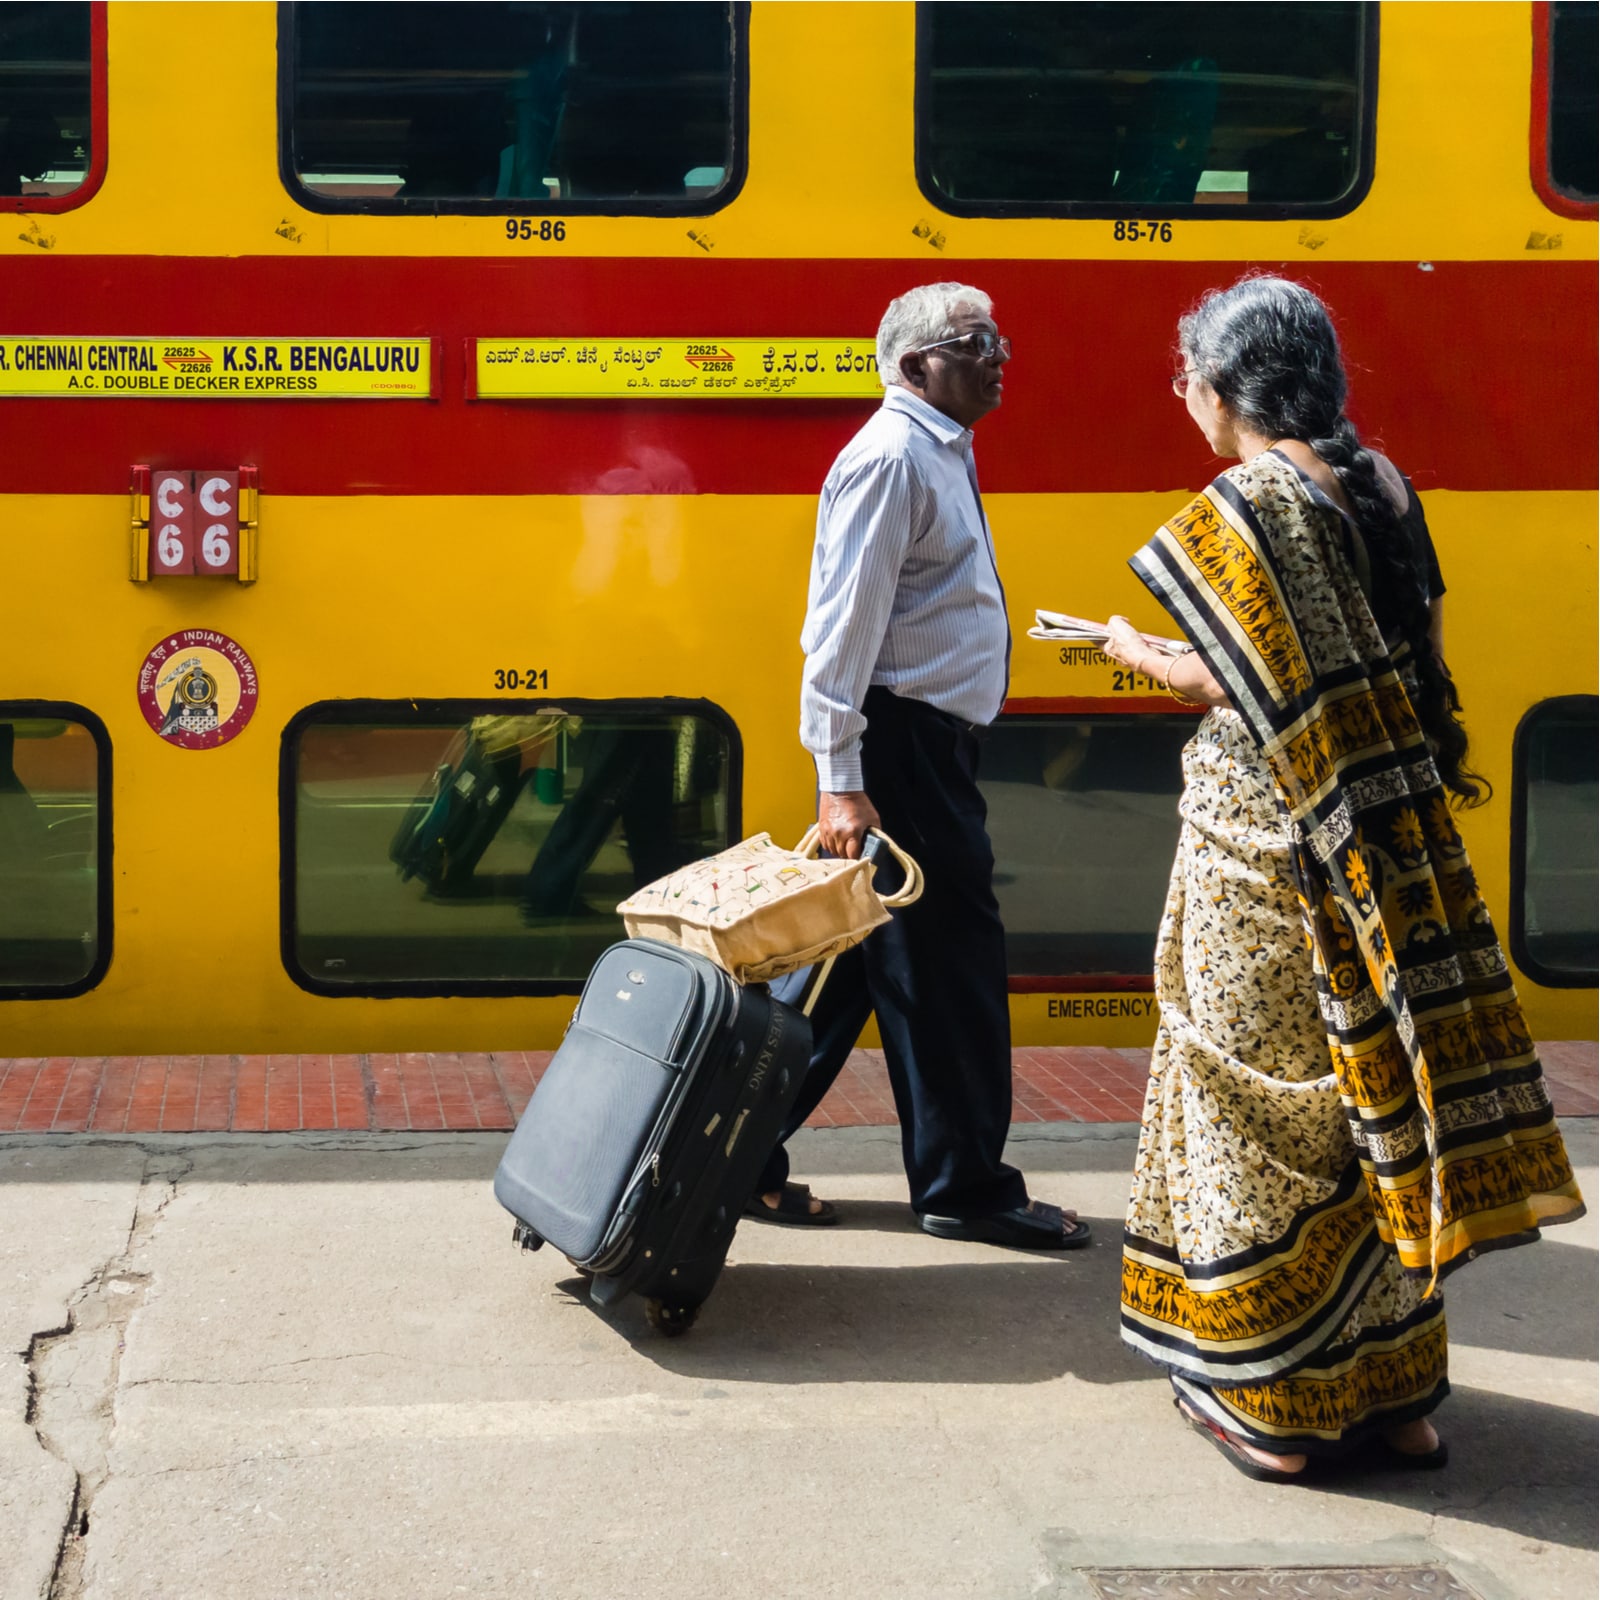 Booking Indian Railways Tickets for Senior Citizens? Here's How to Get Confirmed Lower Berths